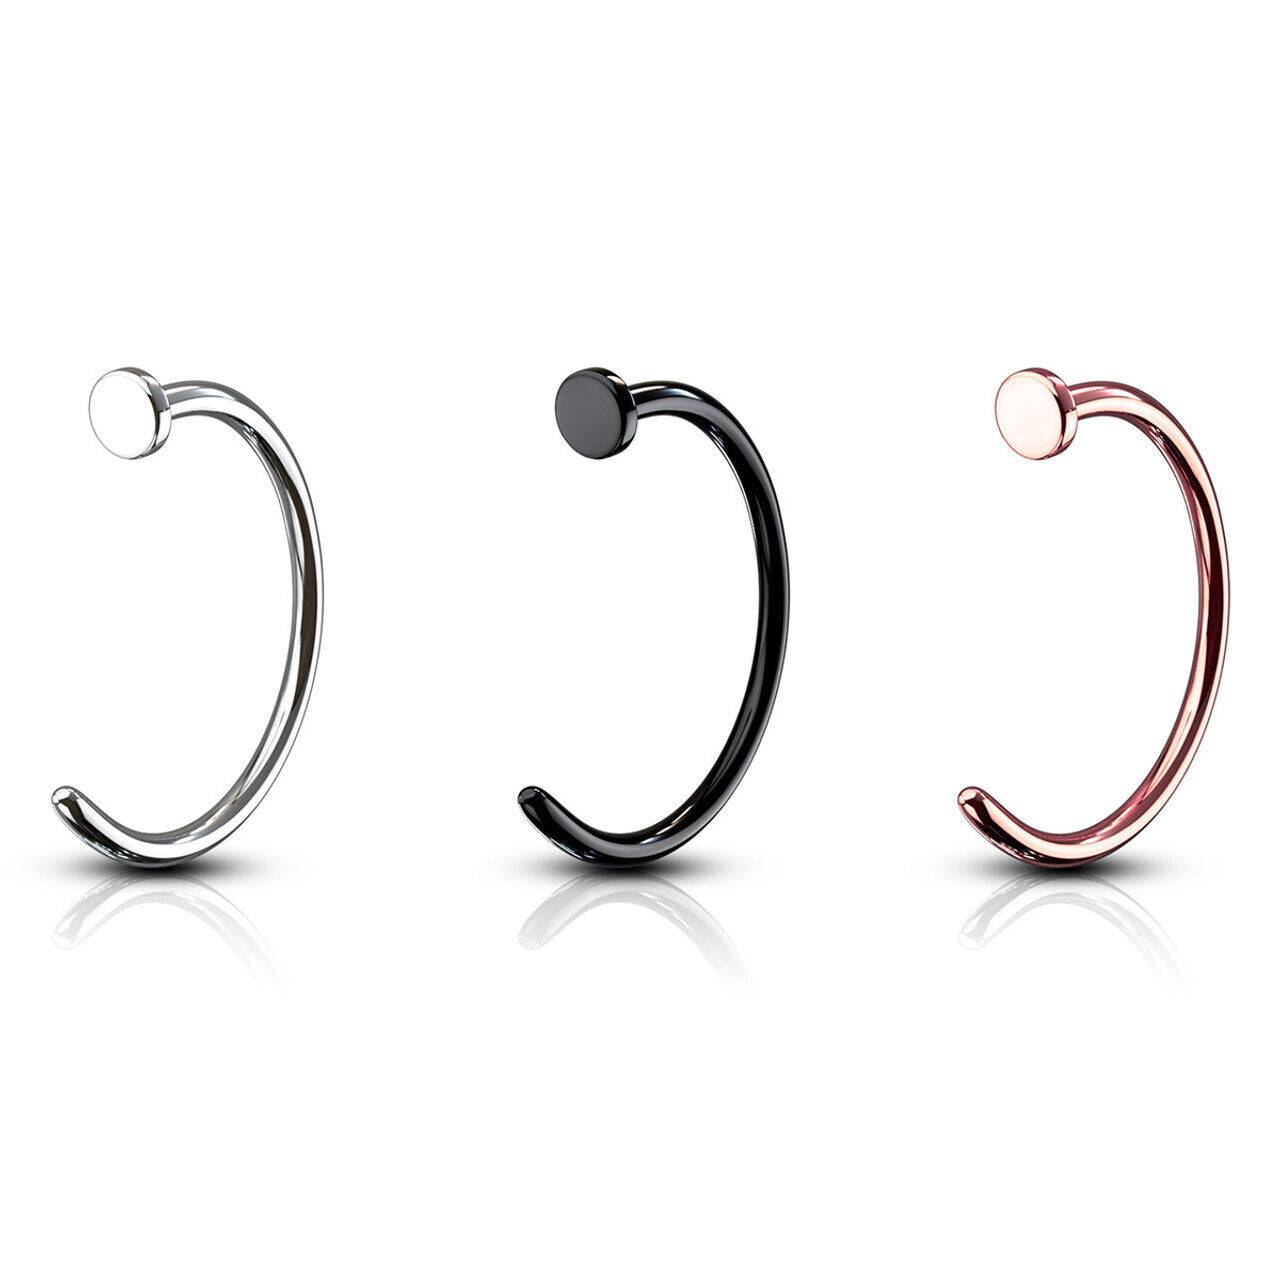 Nose Ear Ring Hoop 3 Pack Black Rose Gold Ion Plated 18G or 20G 6mm 8mm 10mm